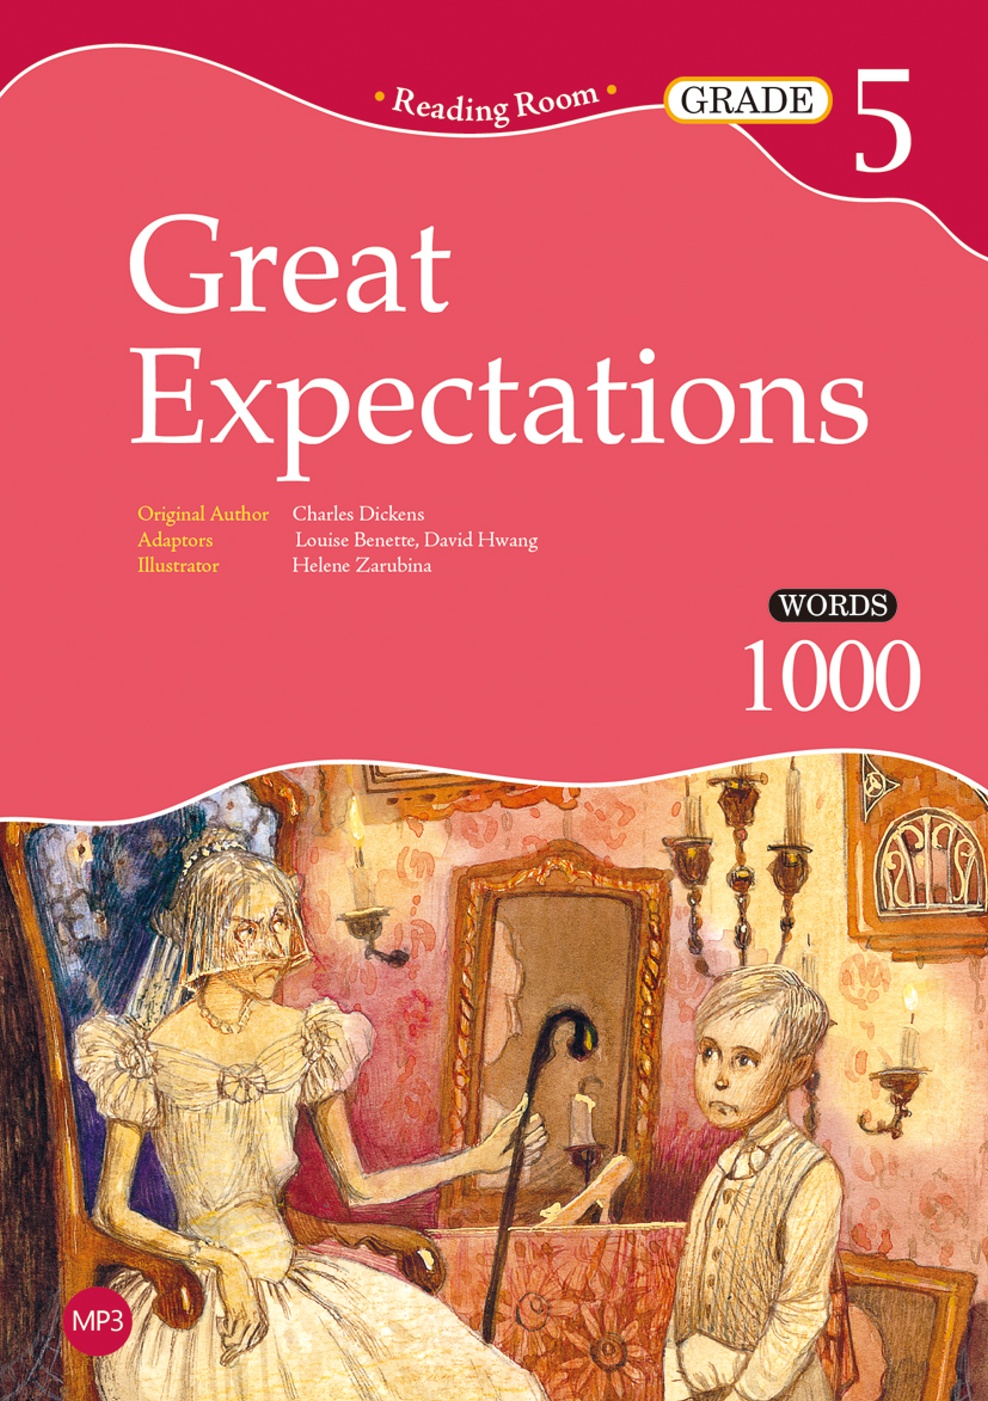 Great Expectations【Grade 5】(2n...